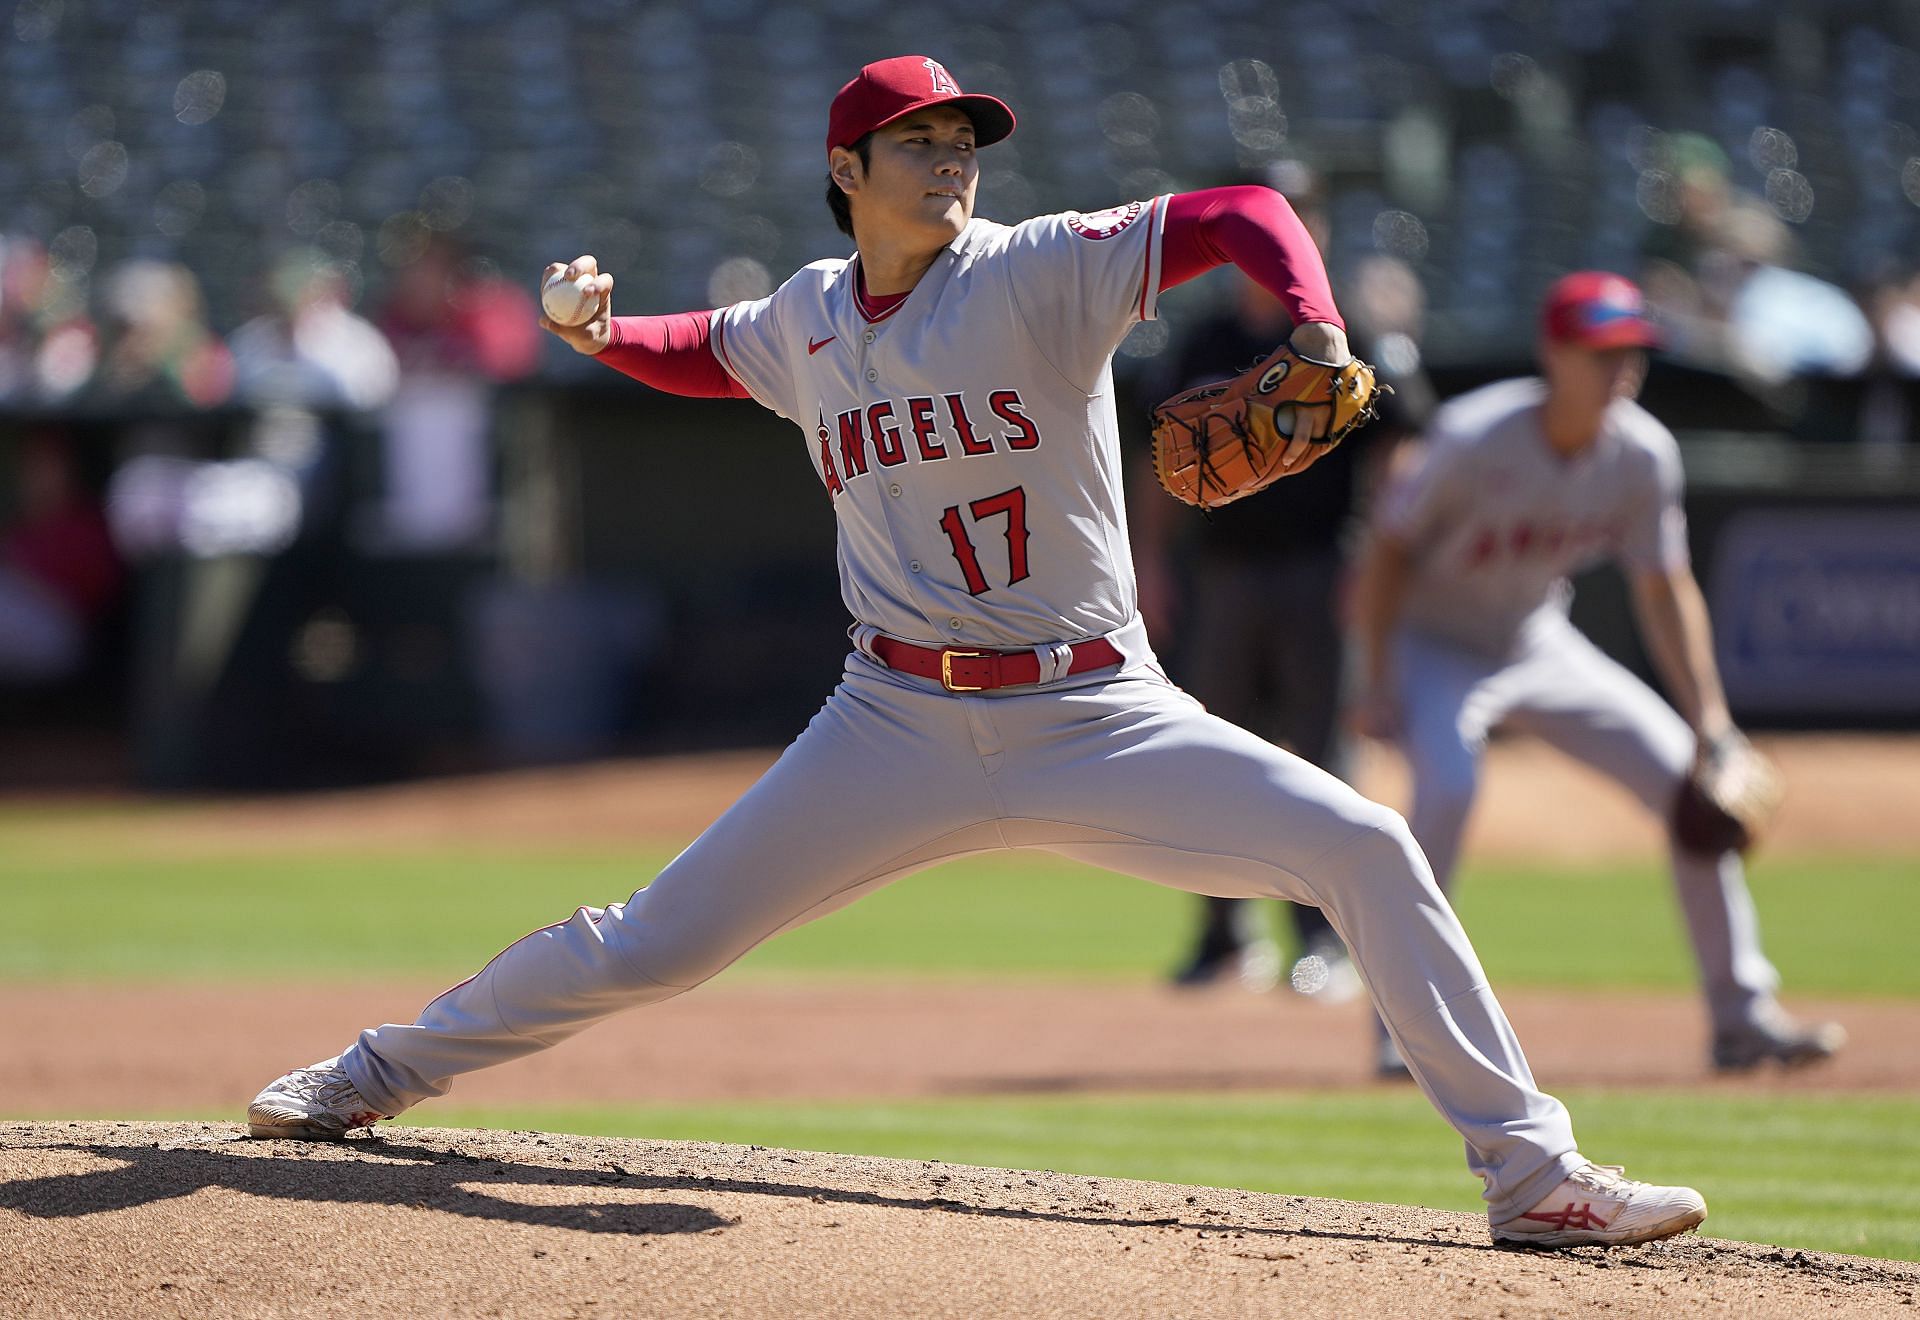 Shohei Ohtani of the Los Angeles Angels pitches against the Oakland Athletics at RingCentral Coliseum